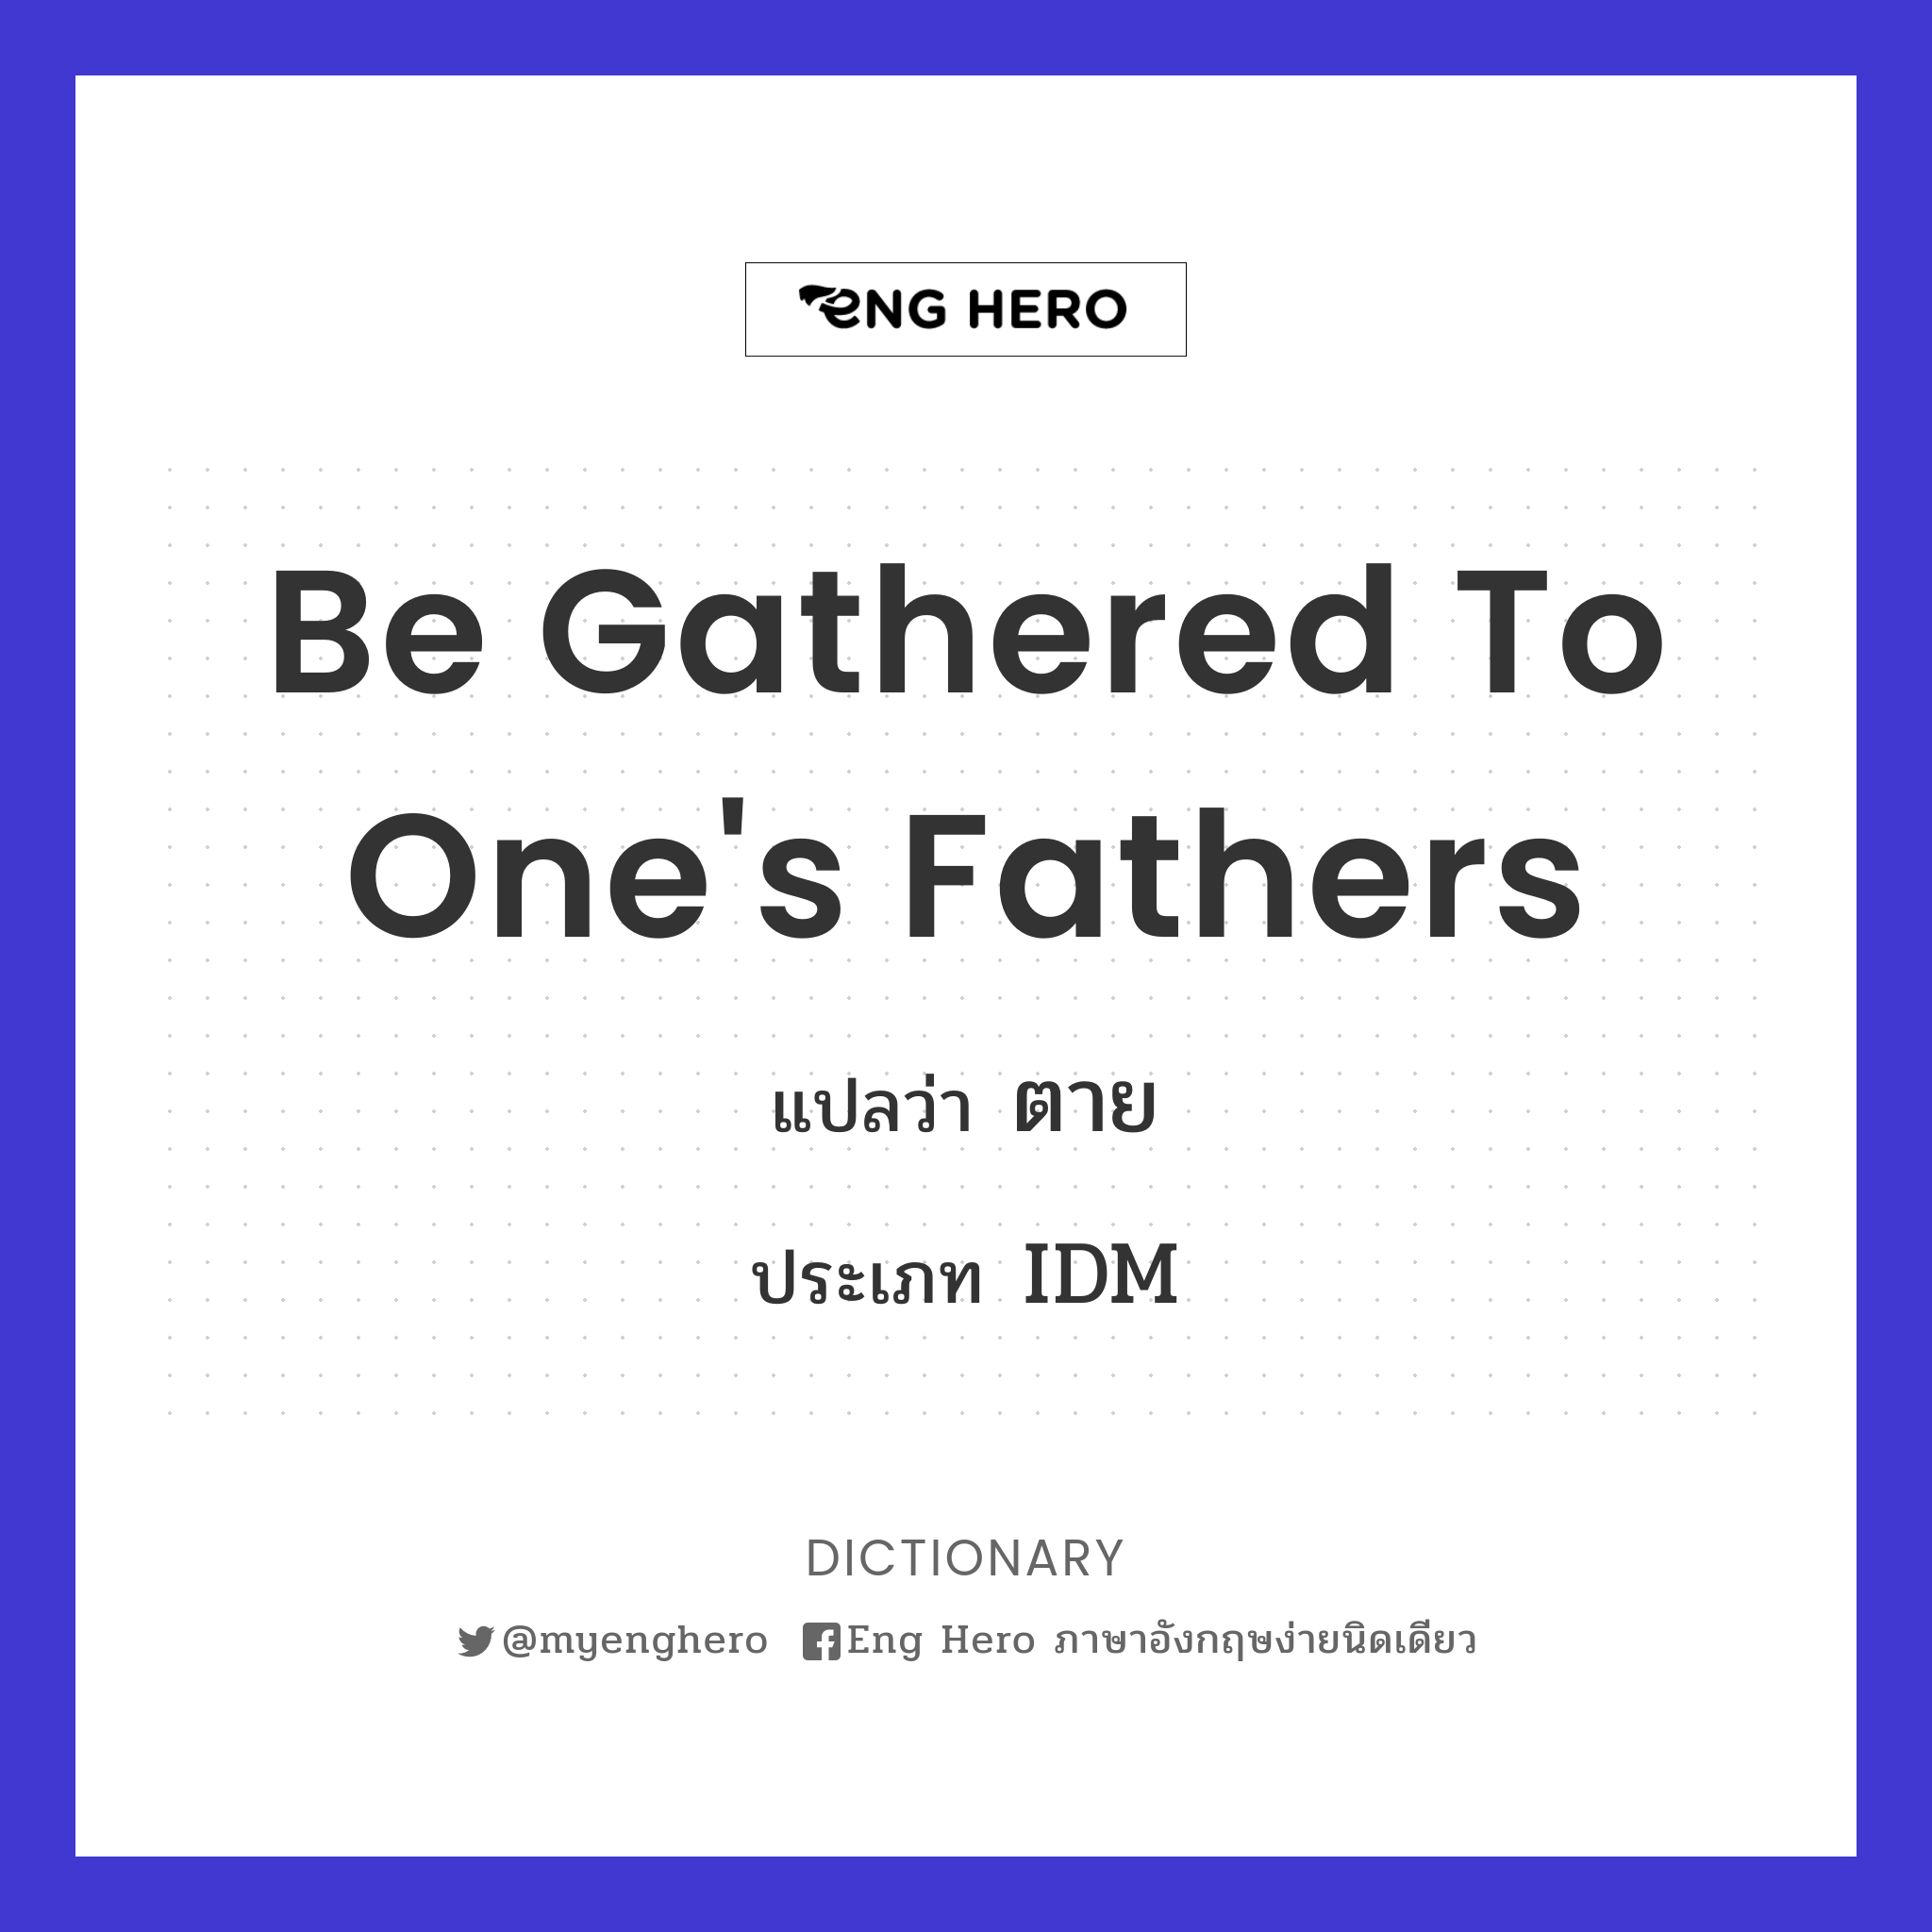 be gathered to one's fathers